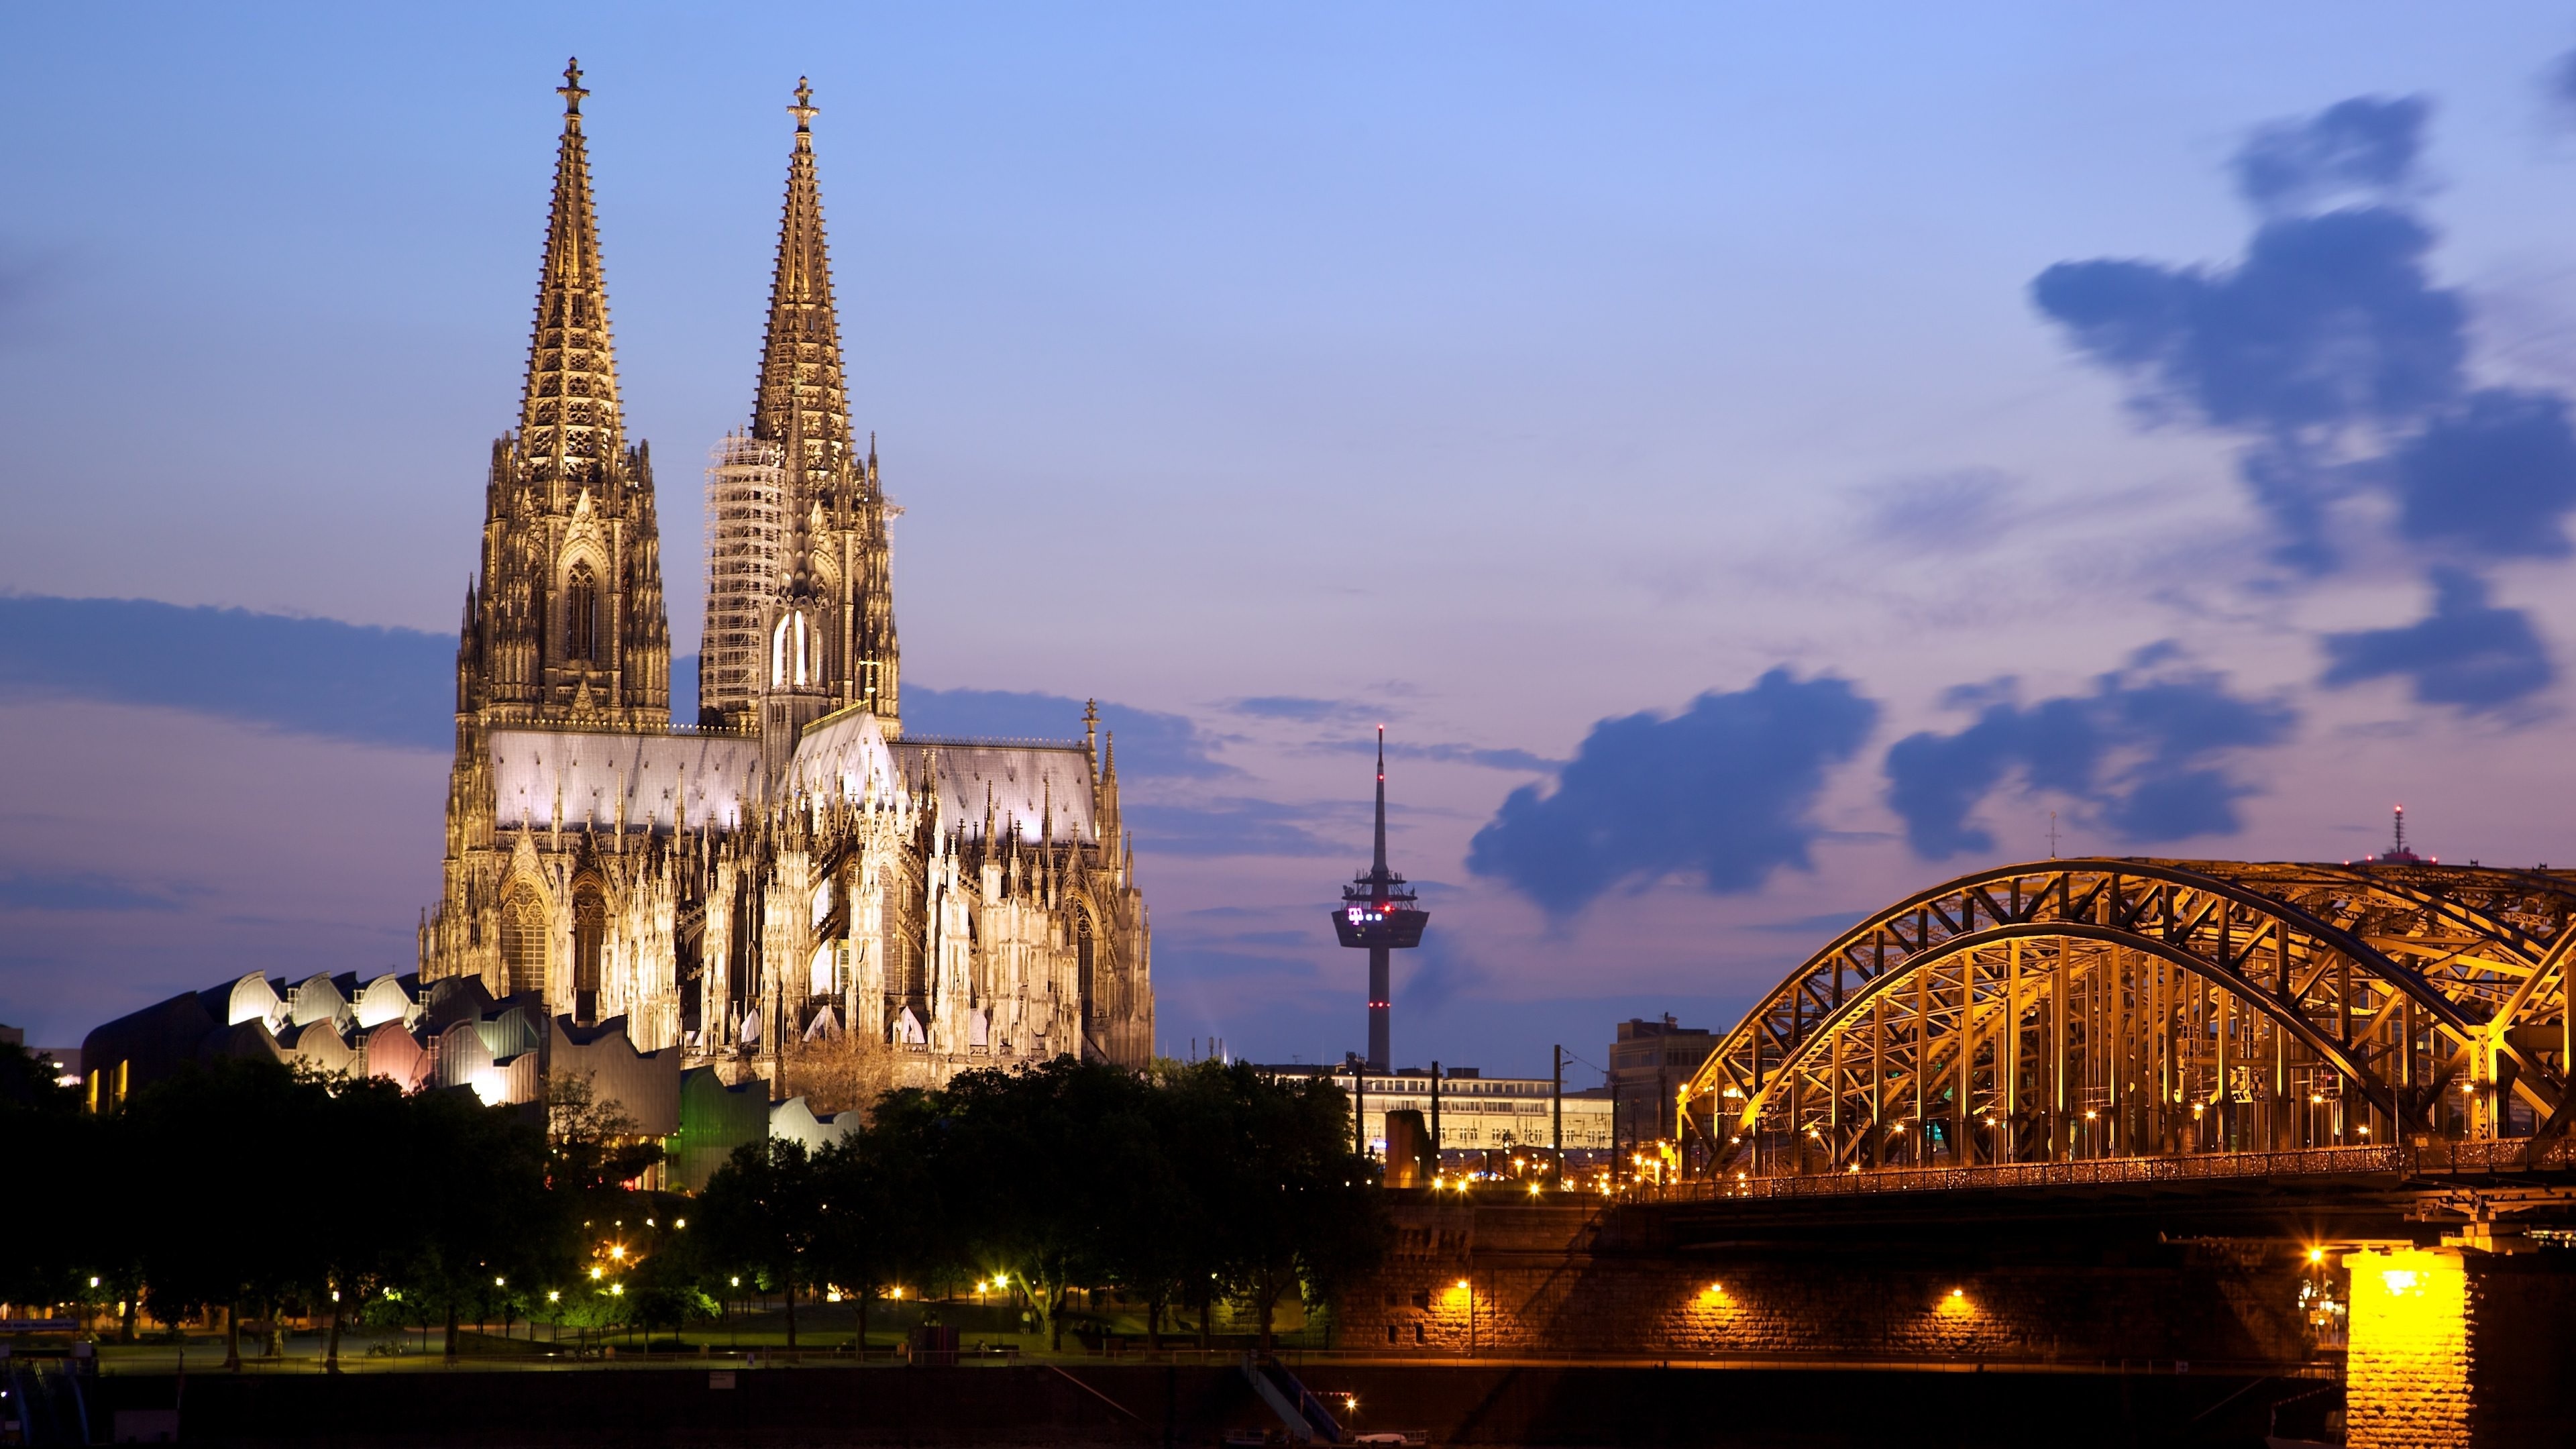 Cathedral: A Catholic church in Cologne, A renowned monument of German Catholicism and Gothic architecture. 3840x2160 4K Wallpaper.